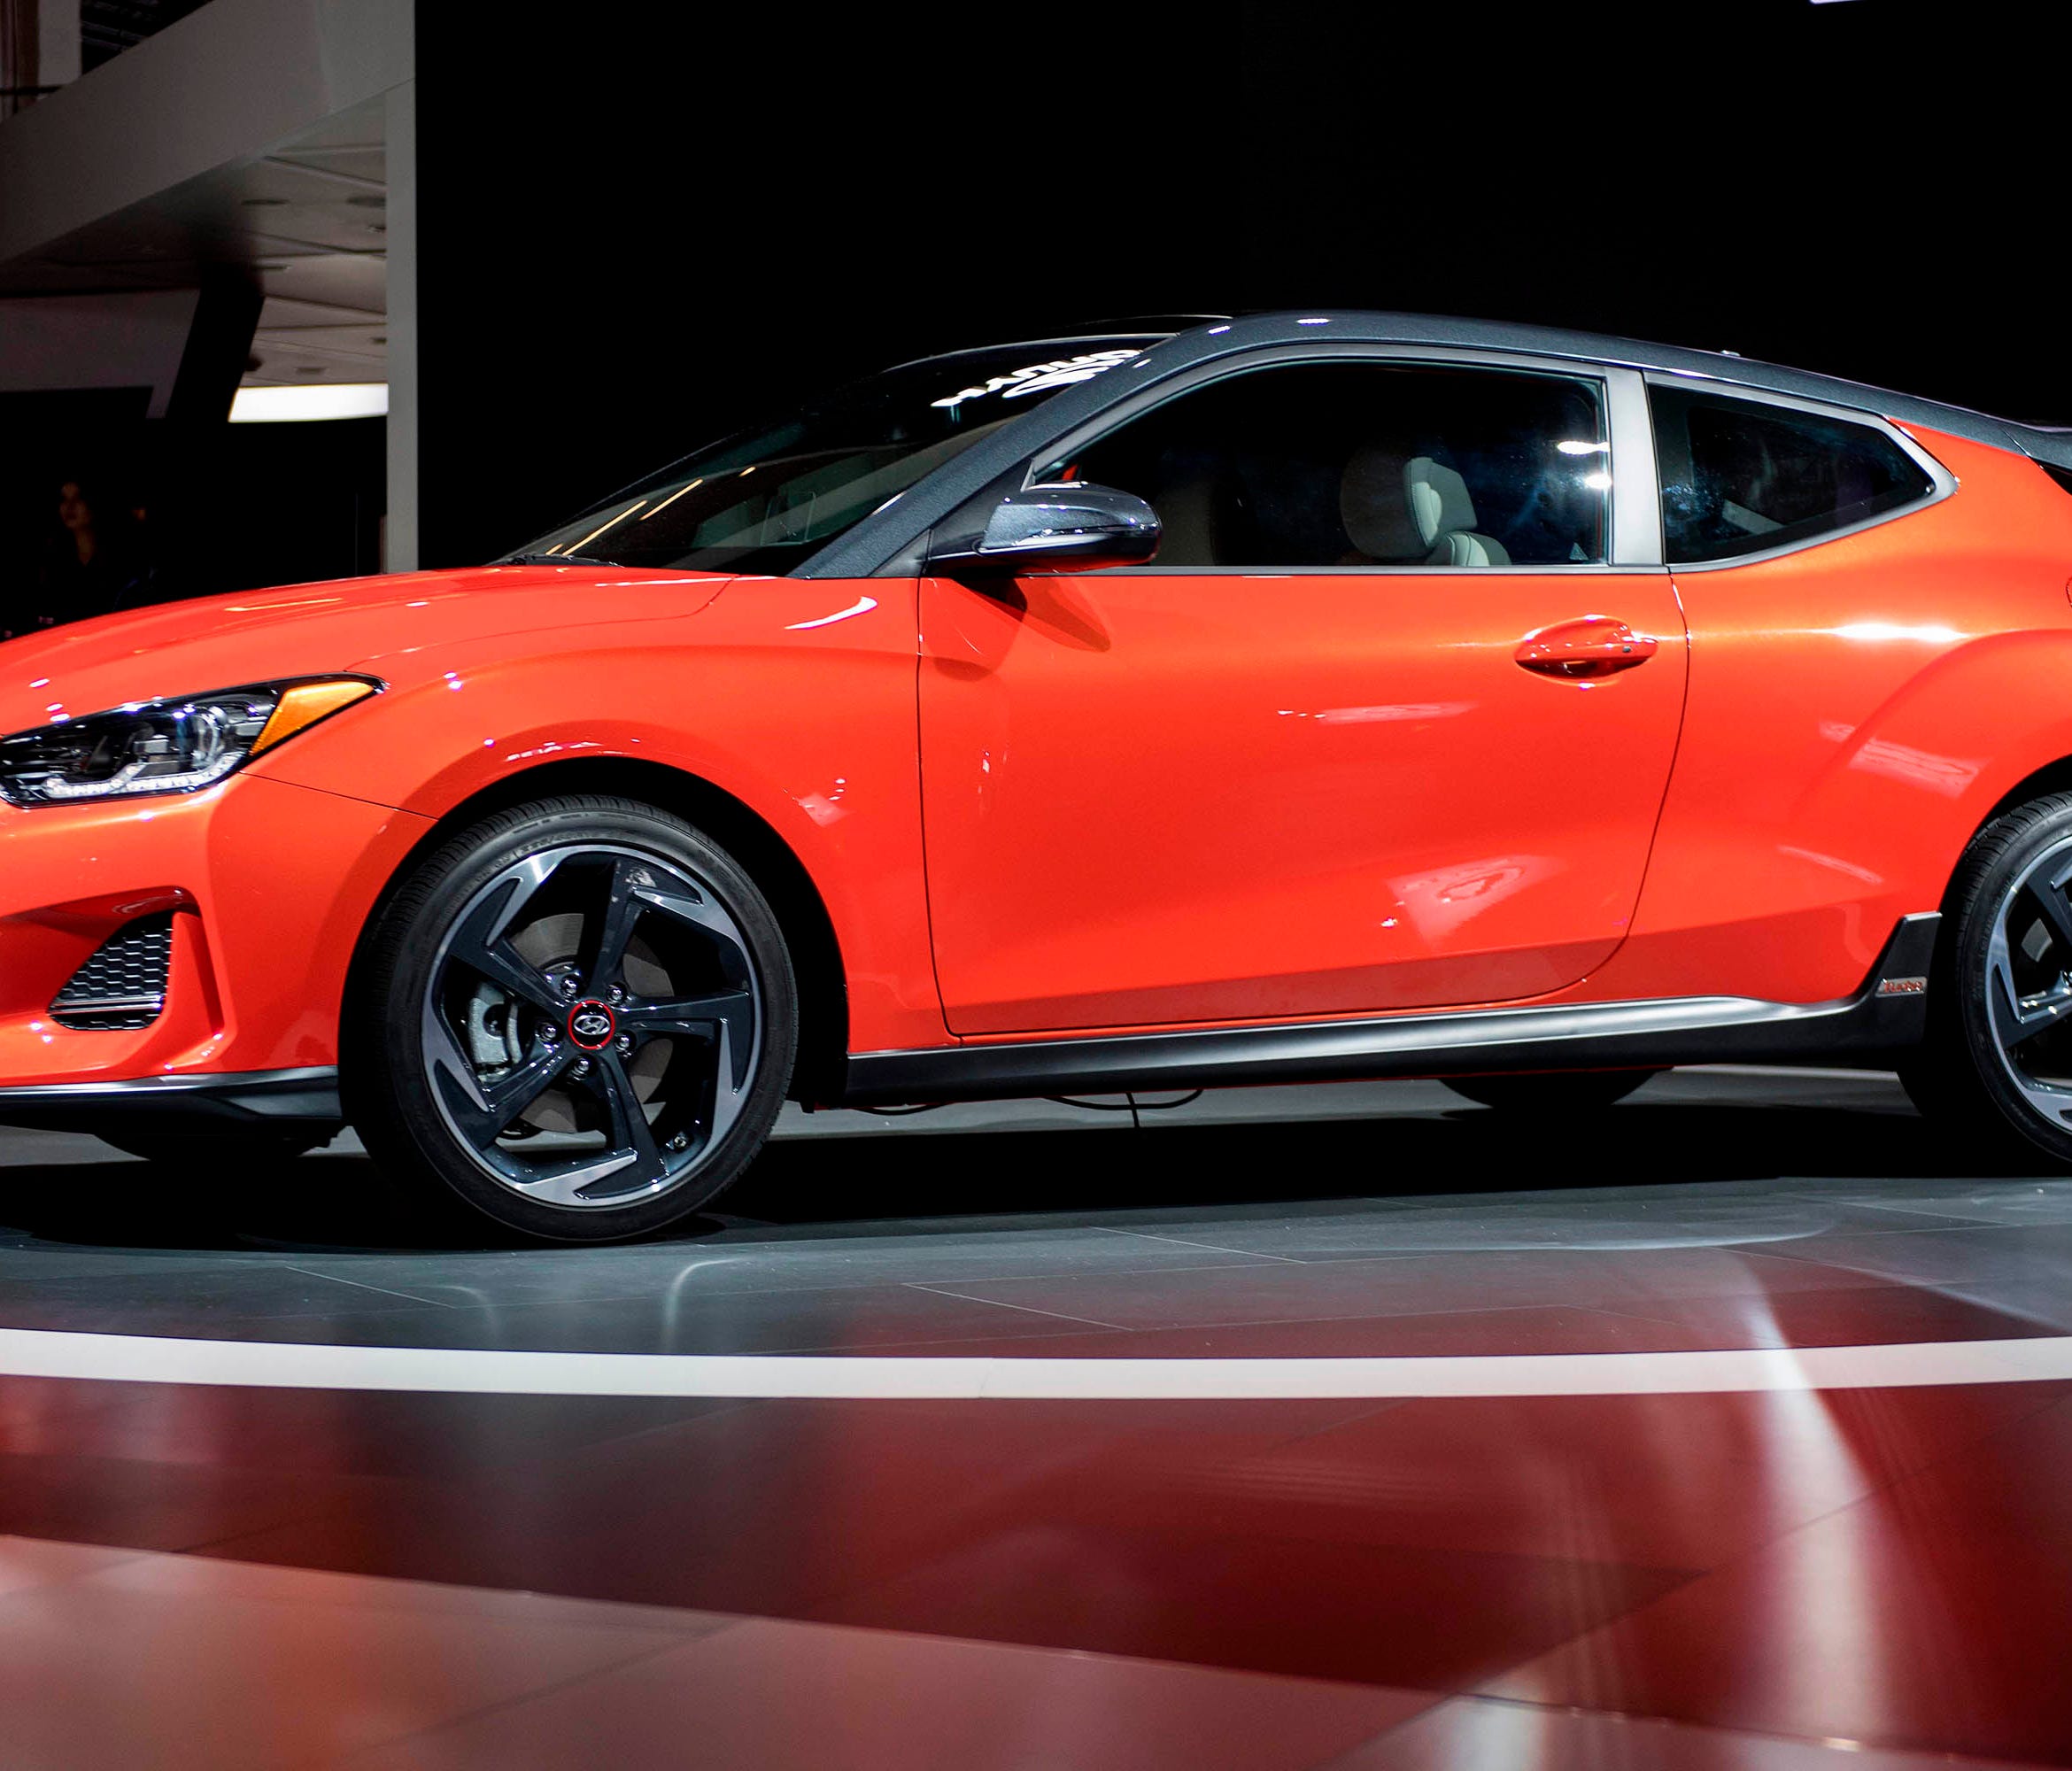 The 2019 Hyundai Veloster is introduced during the 2018 North American International Auto Show in Detroit on January 15, 2018.